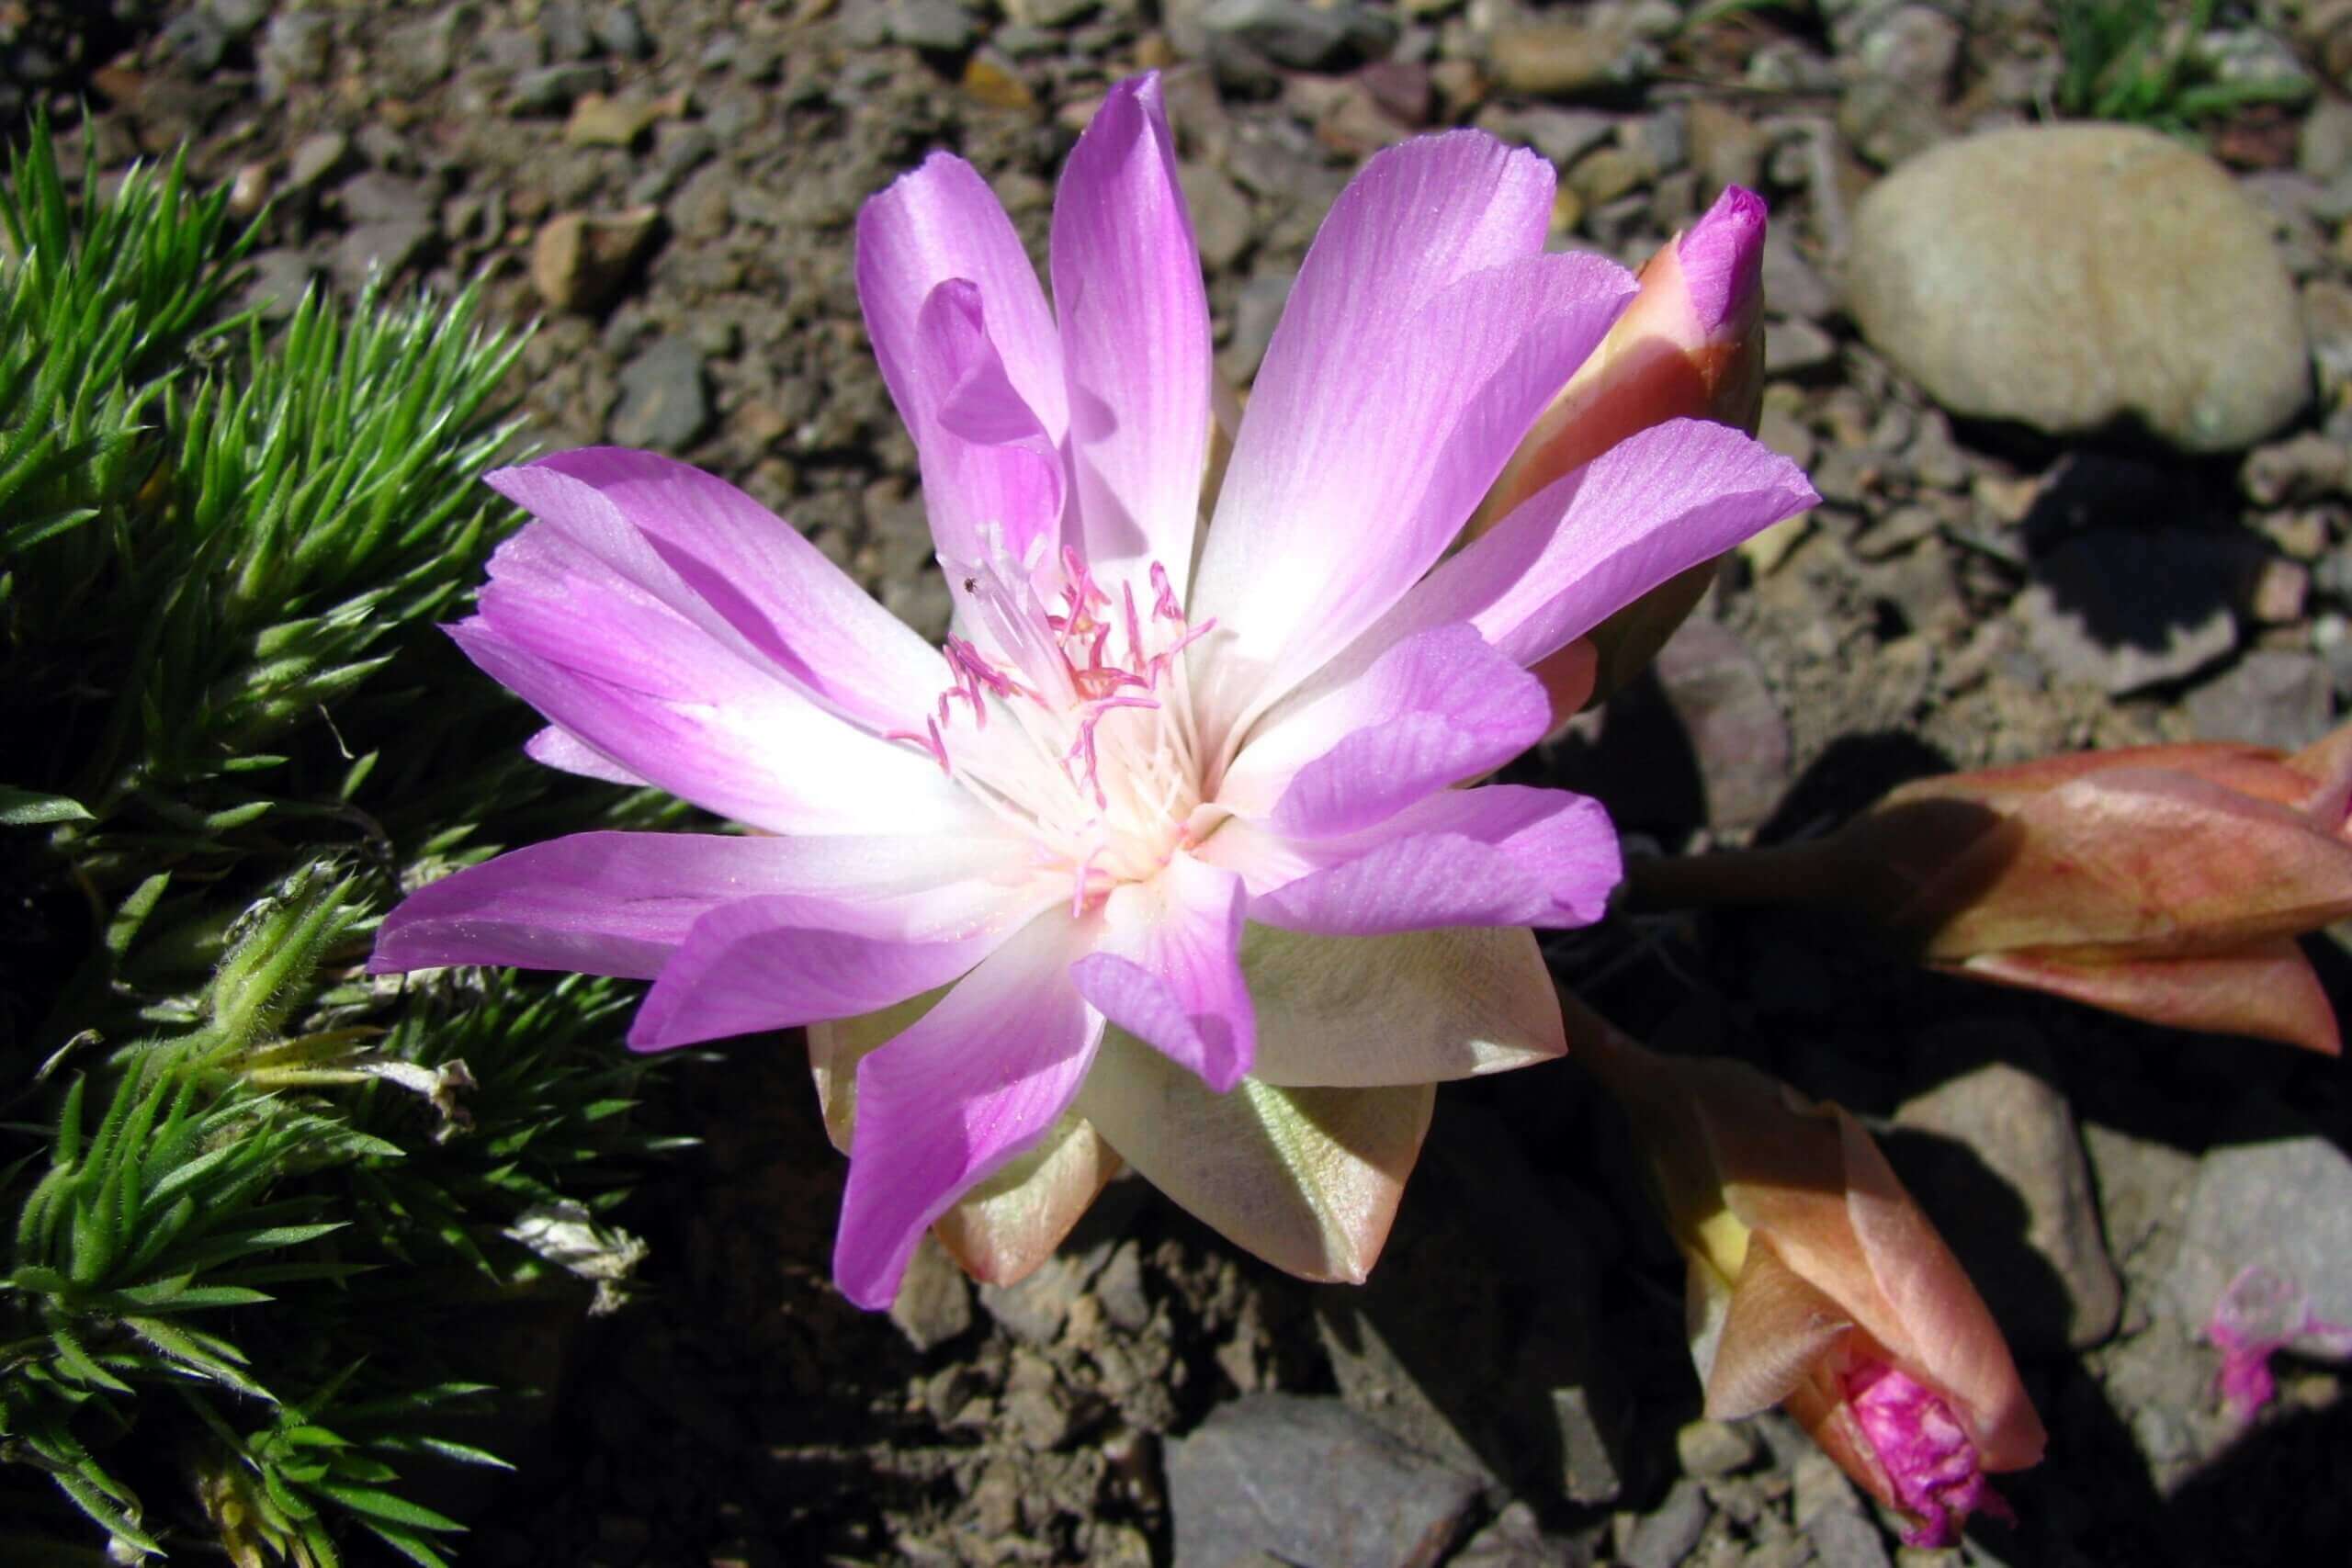 photo of a bitterroot flower, with purple and white petals